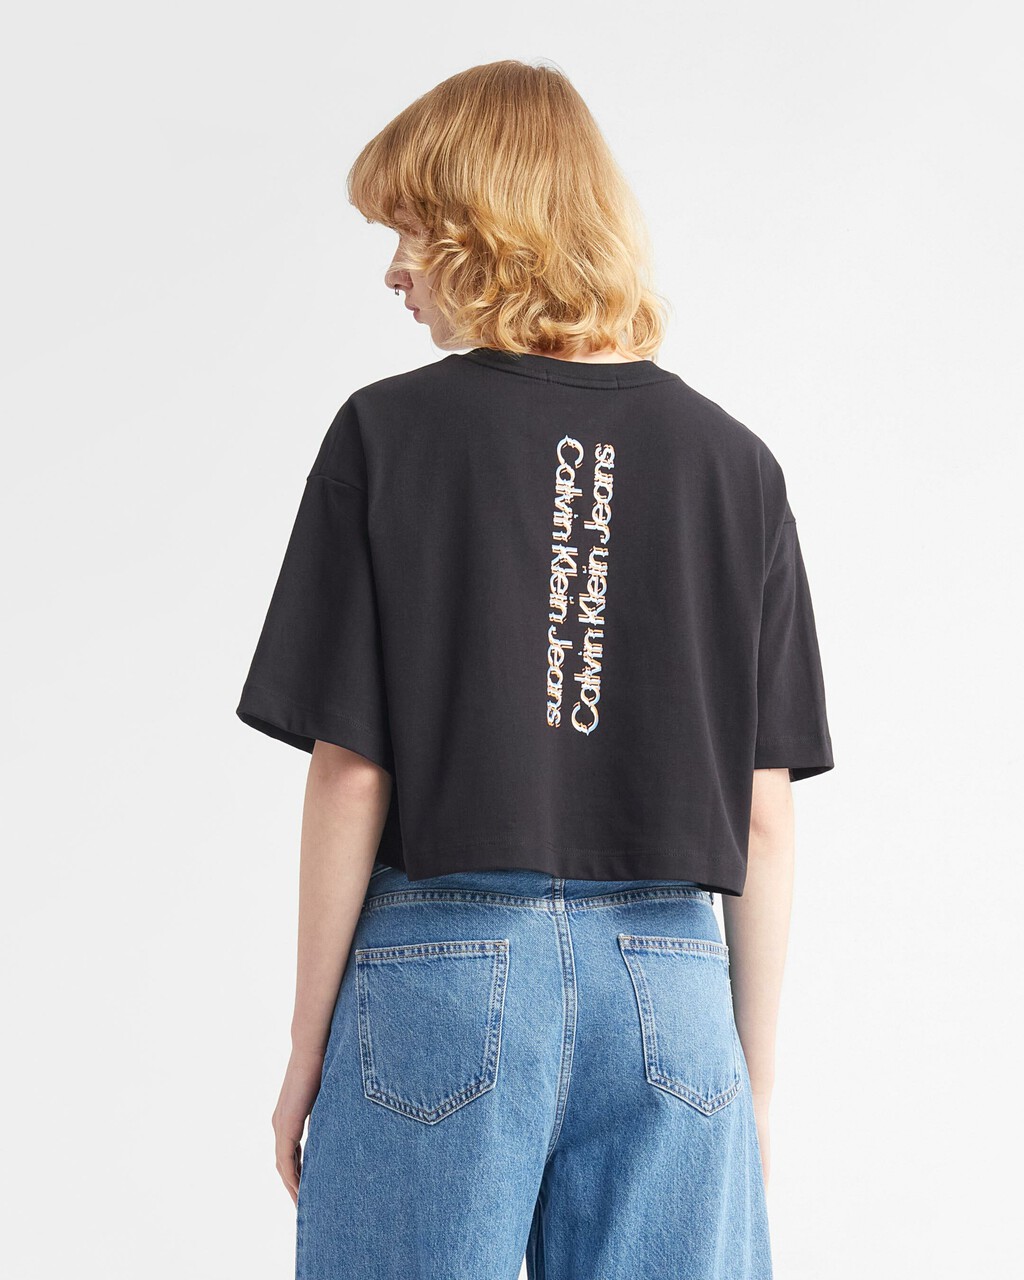 Movements Cropped Graphic Tee, Ck Black, hi-res